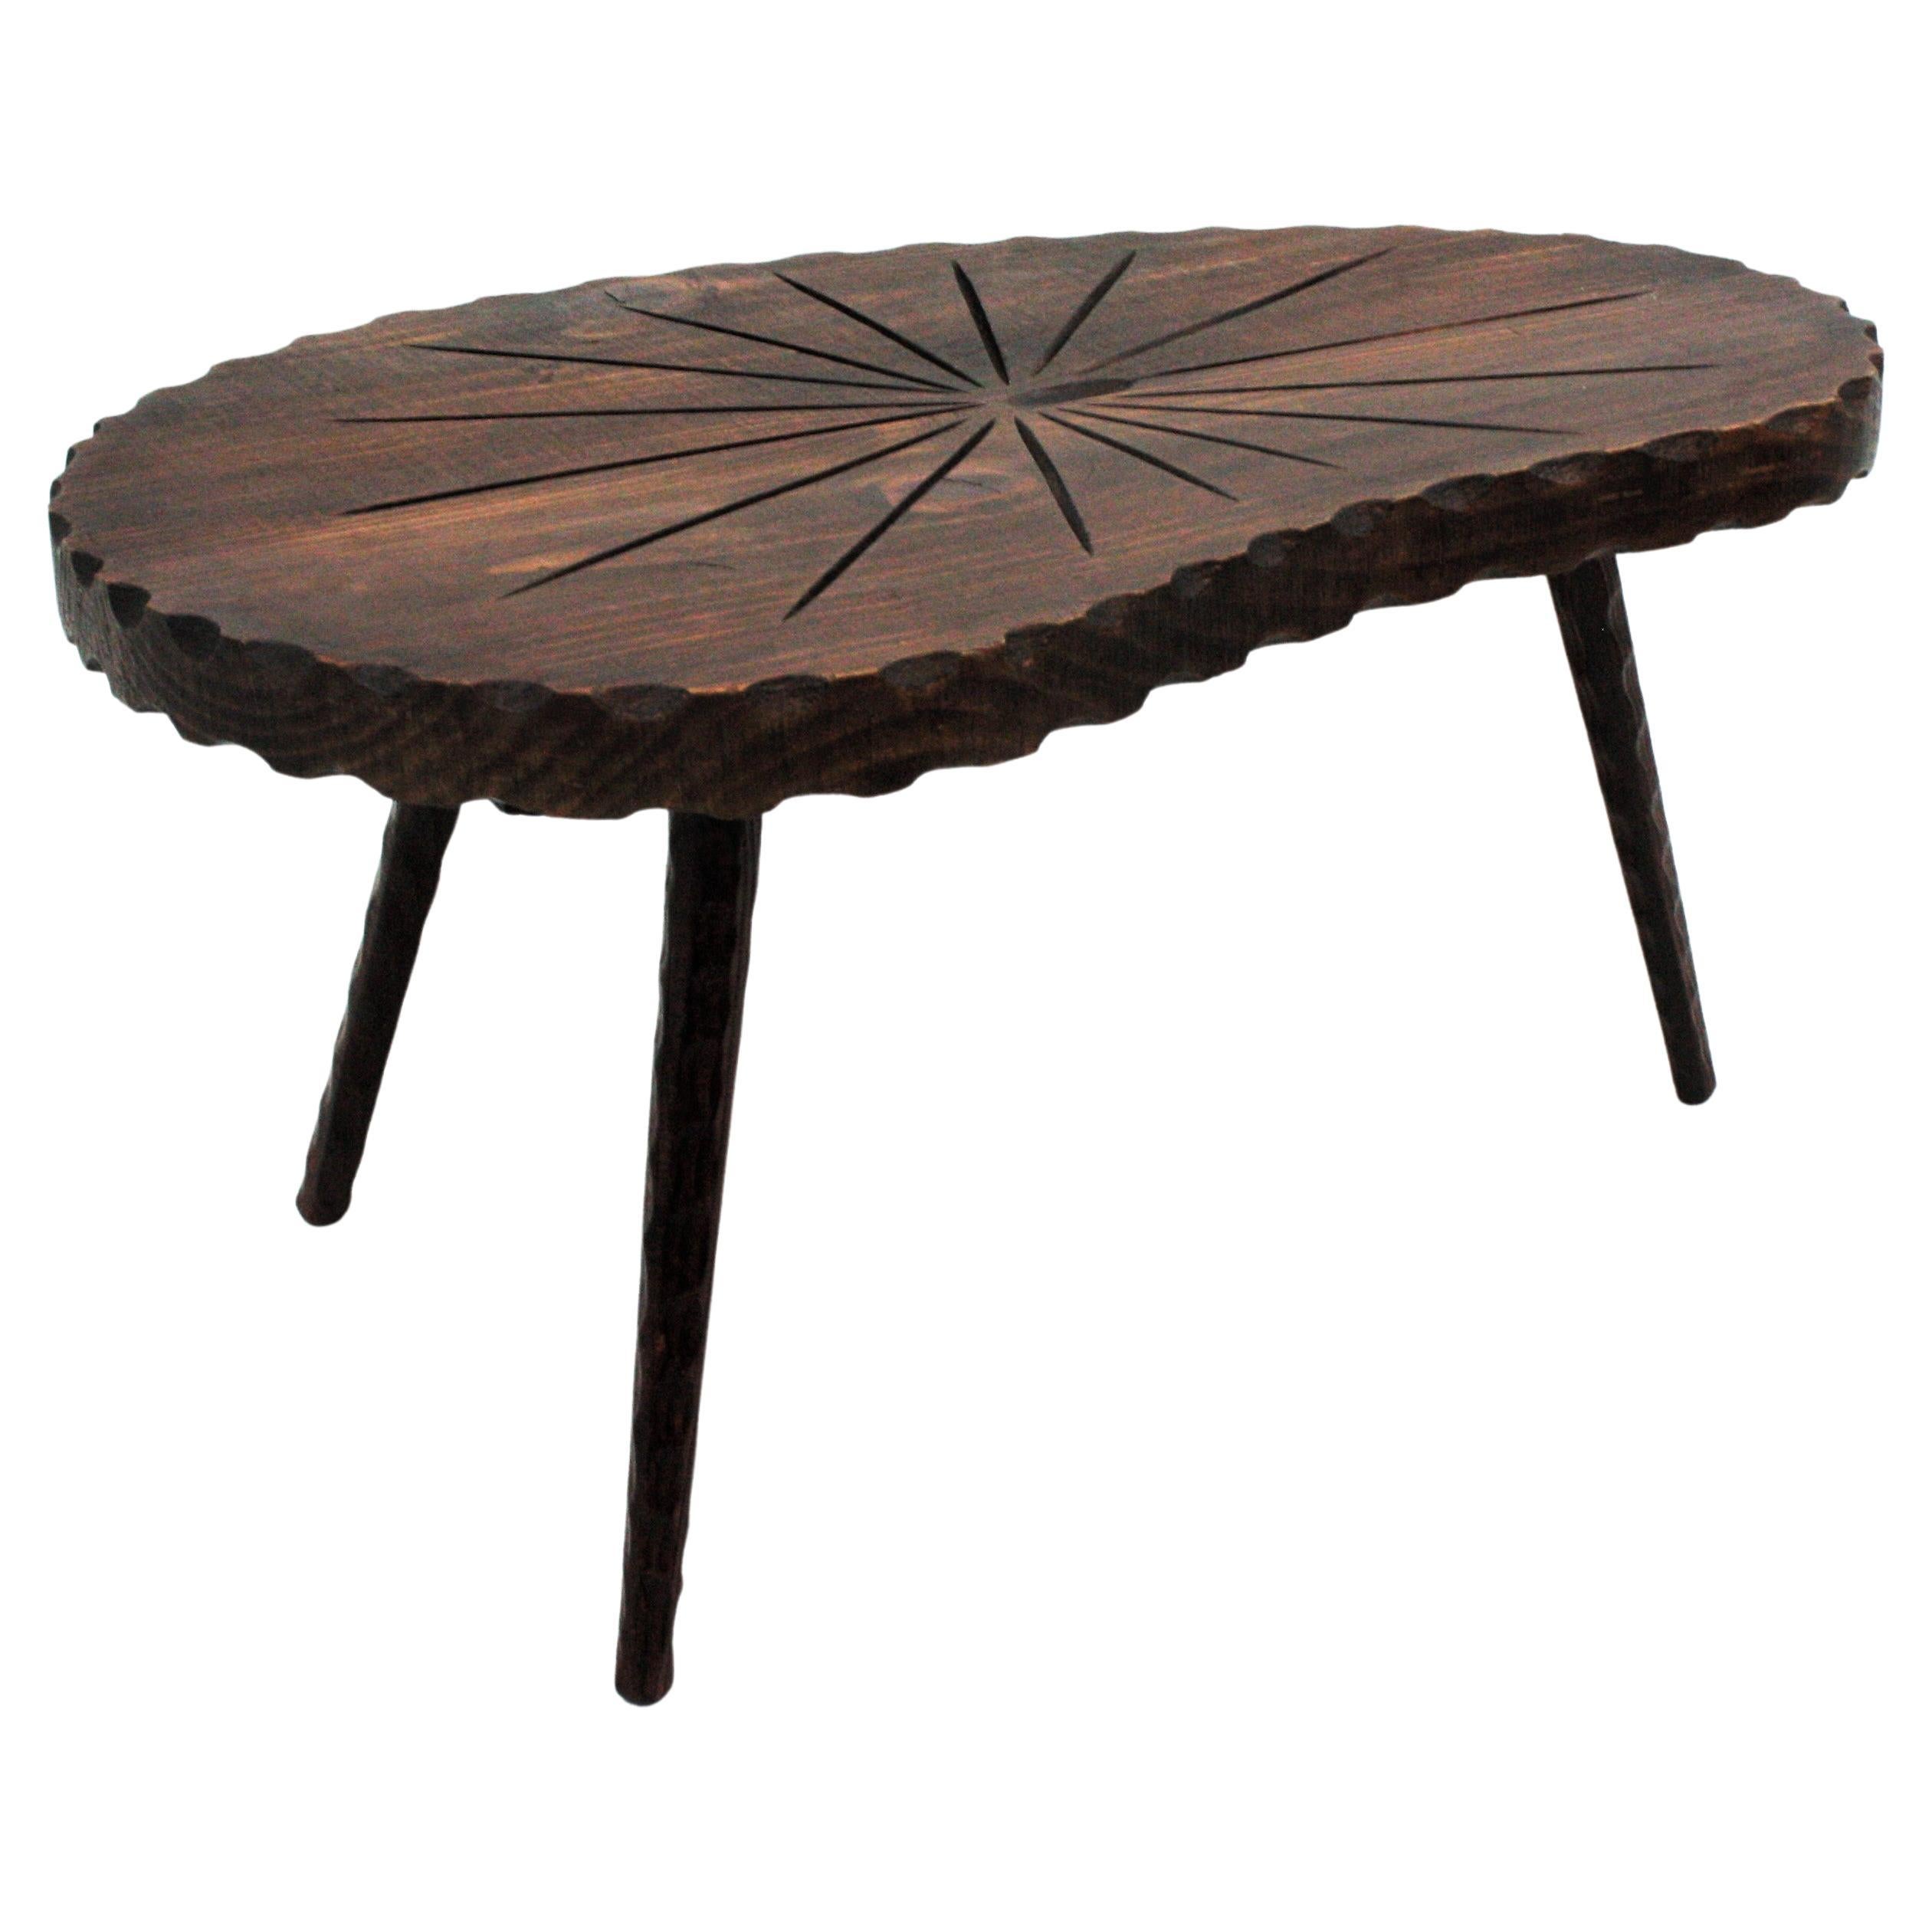 1950s Spanish Kidney Coffee Table in Carved Wood